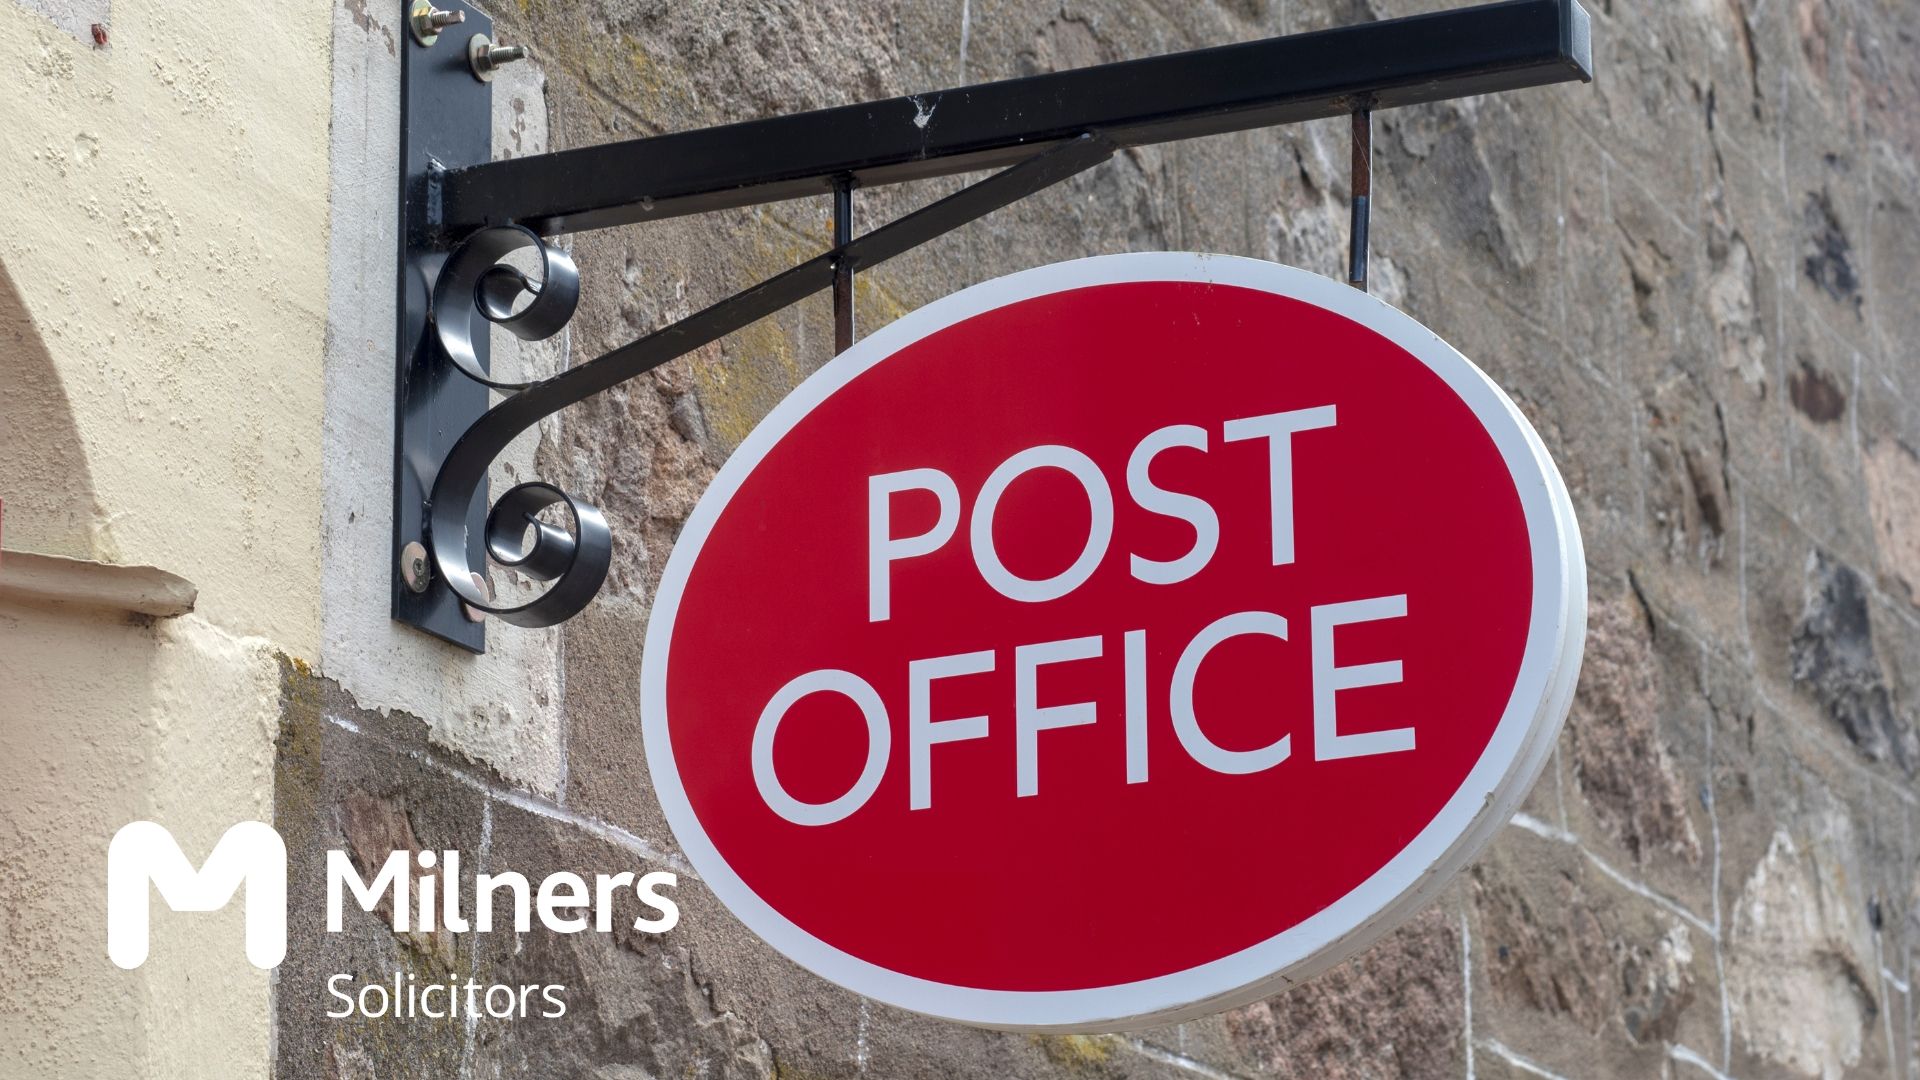 It's been called the biggest miscarriage of justice in UK history. Learn about the Post Office 